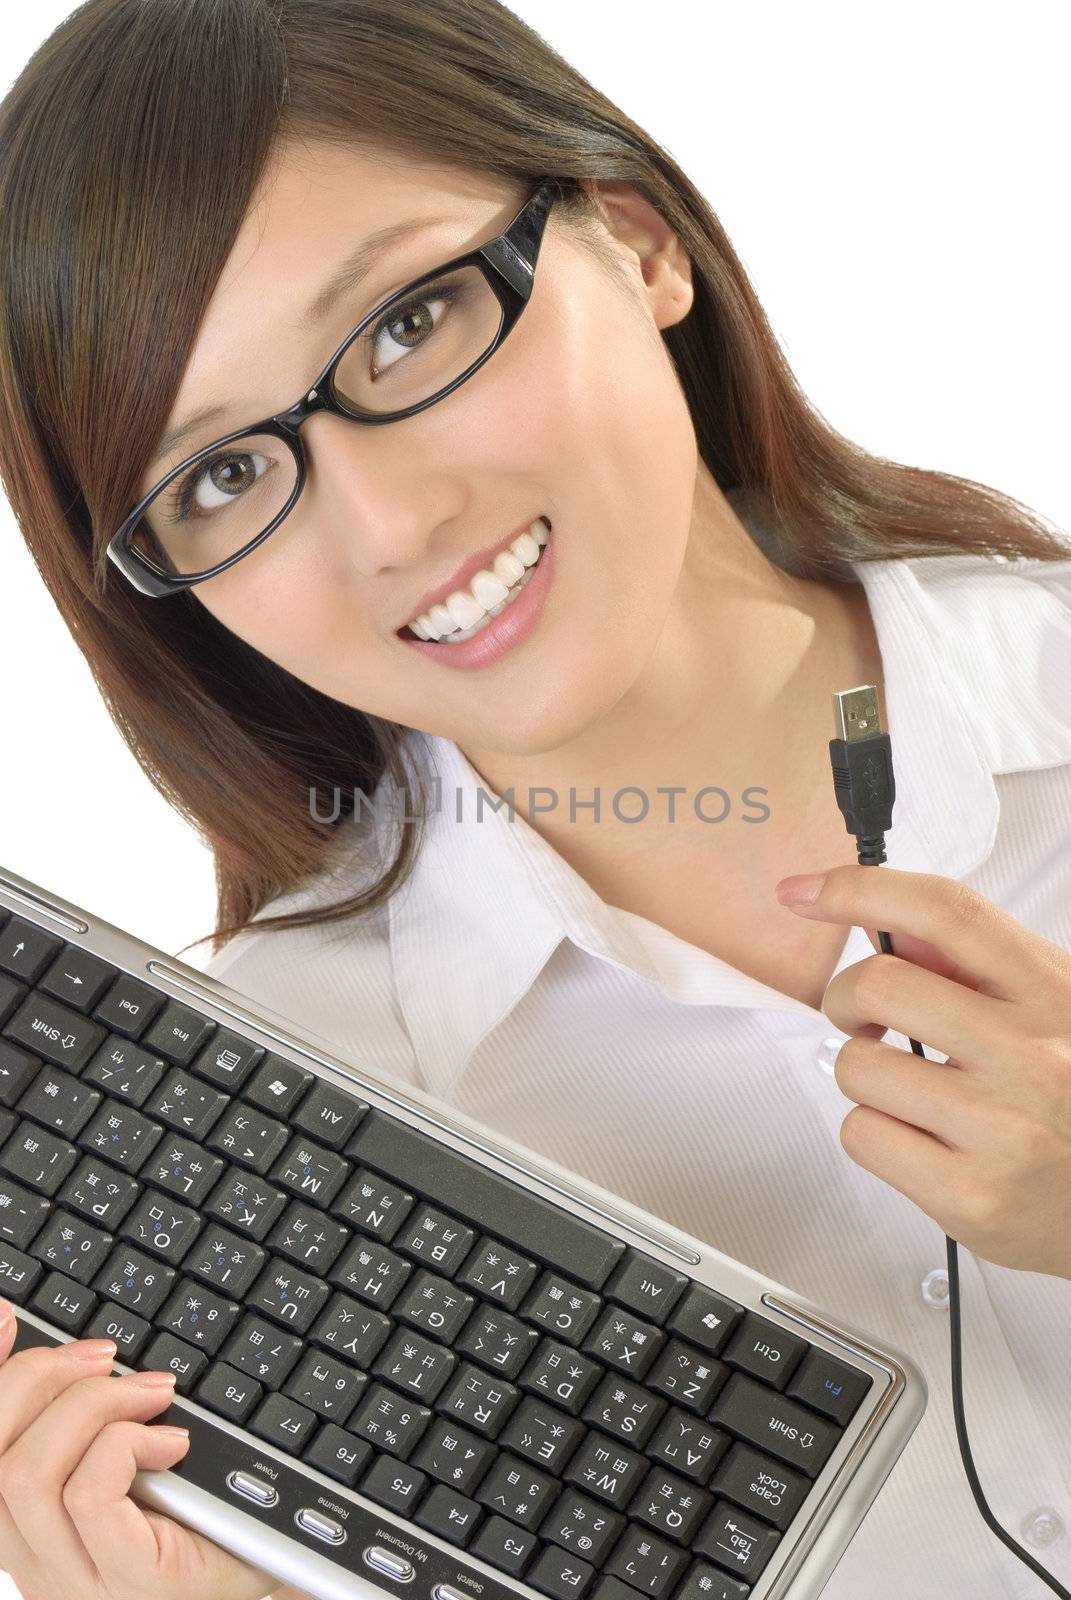 Businesswoman with computer keyboard smiling on white background.